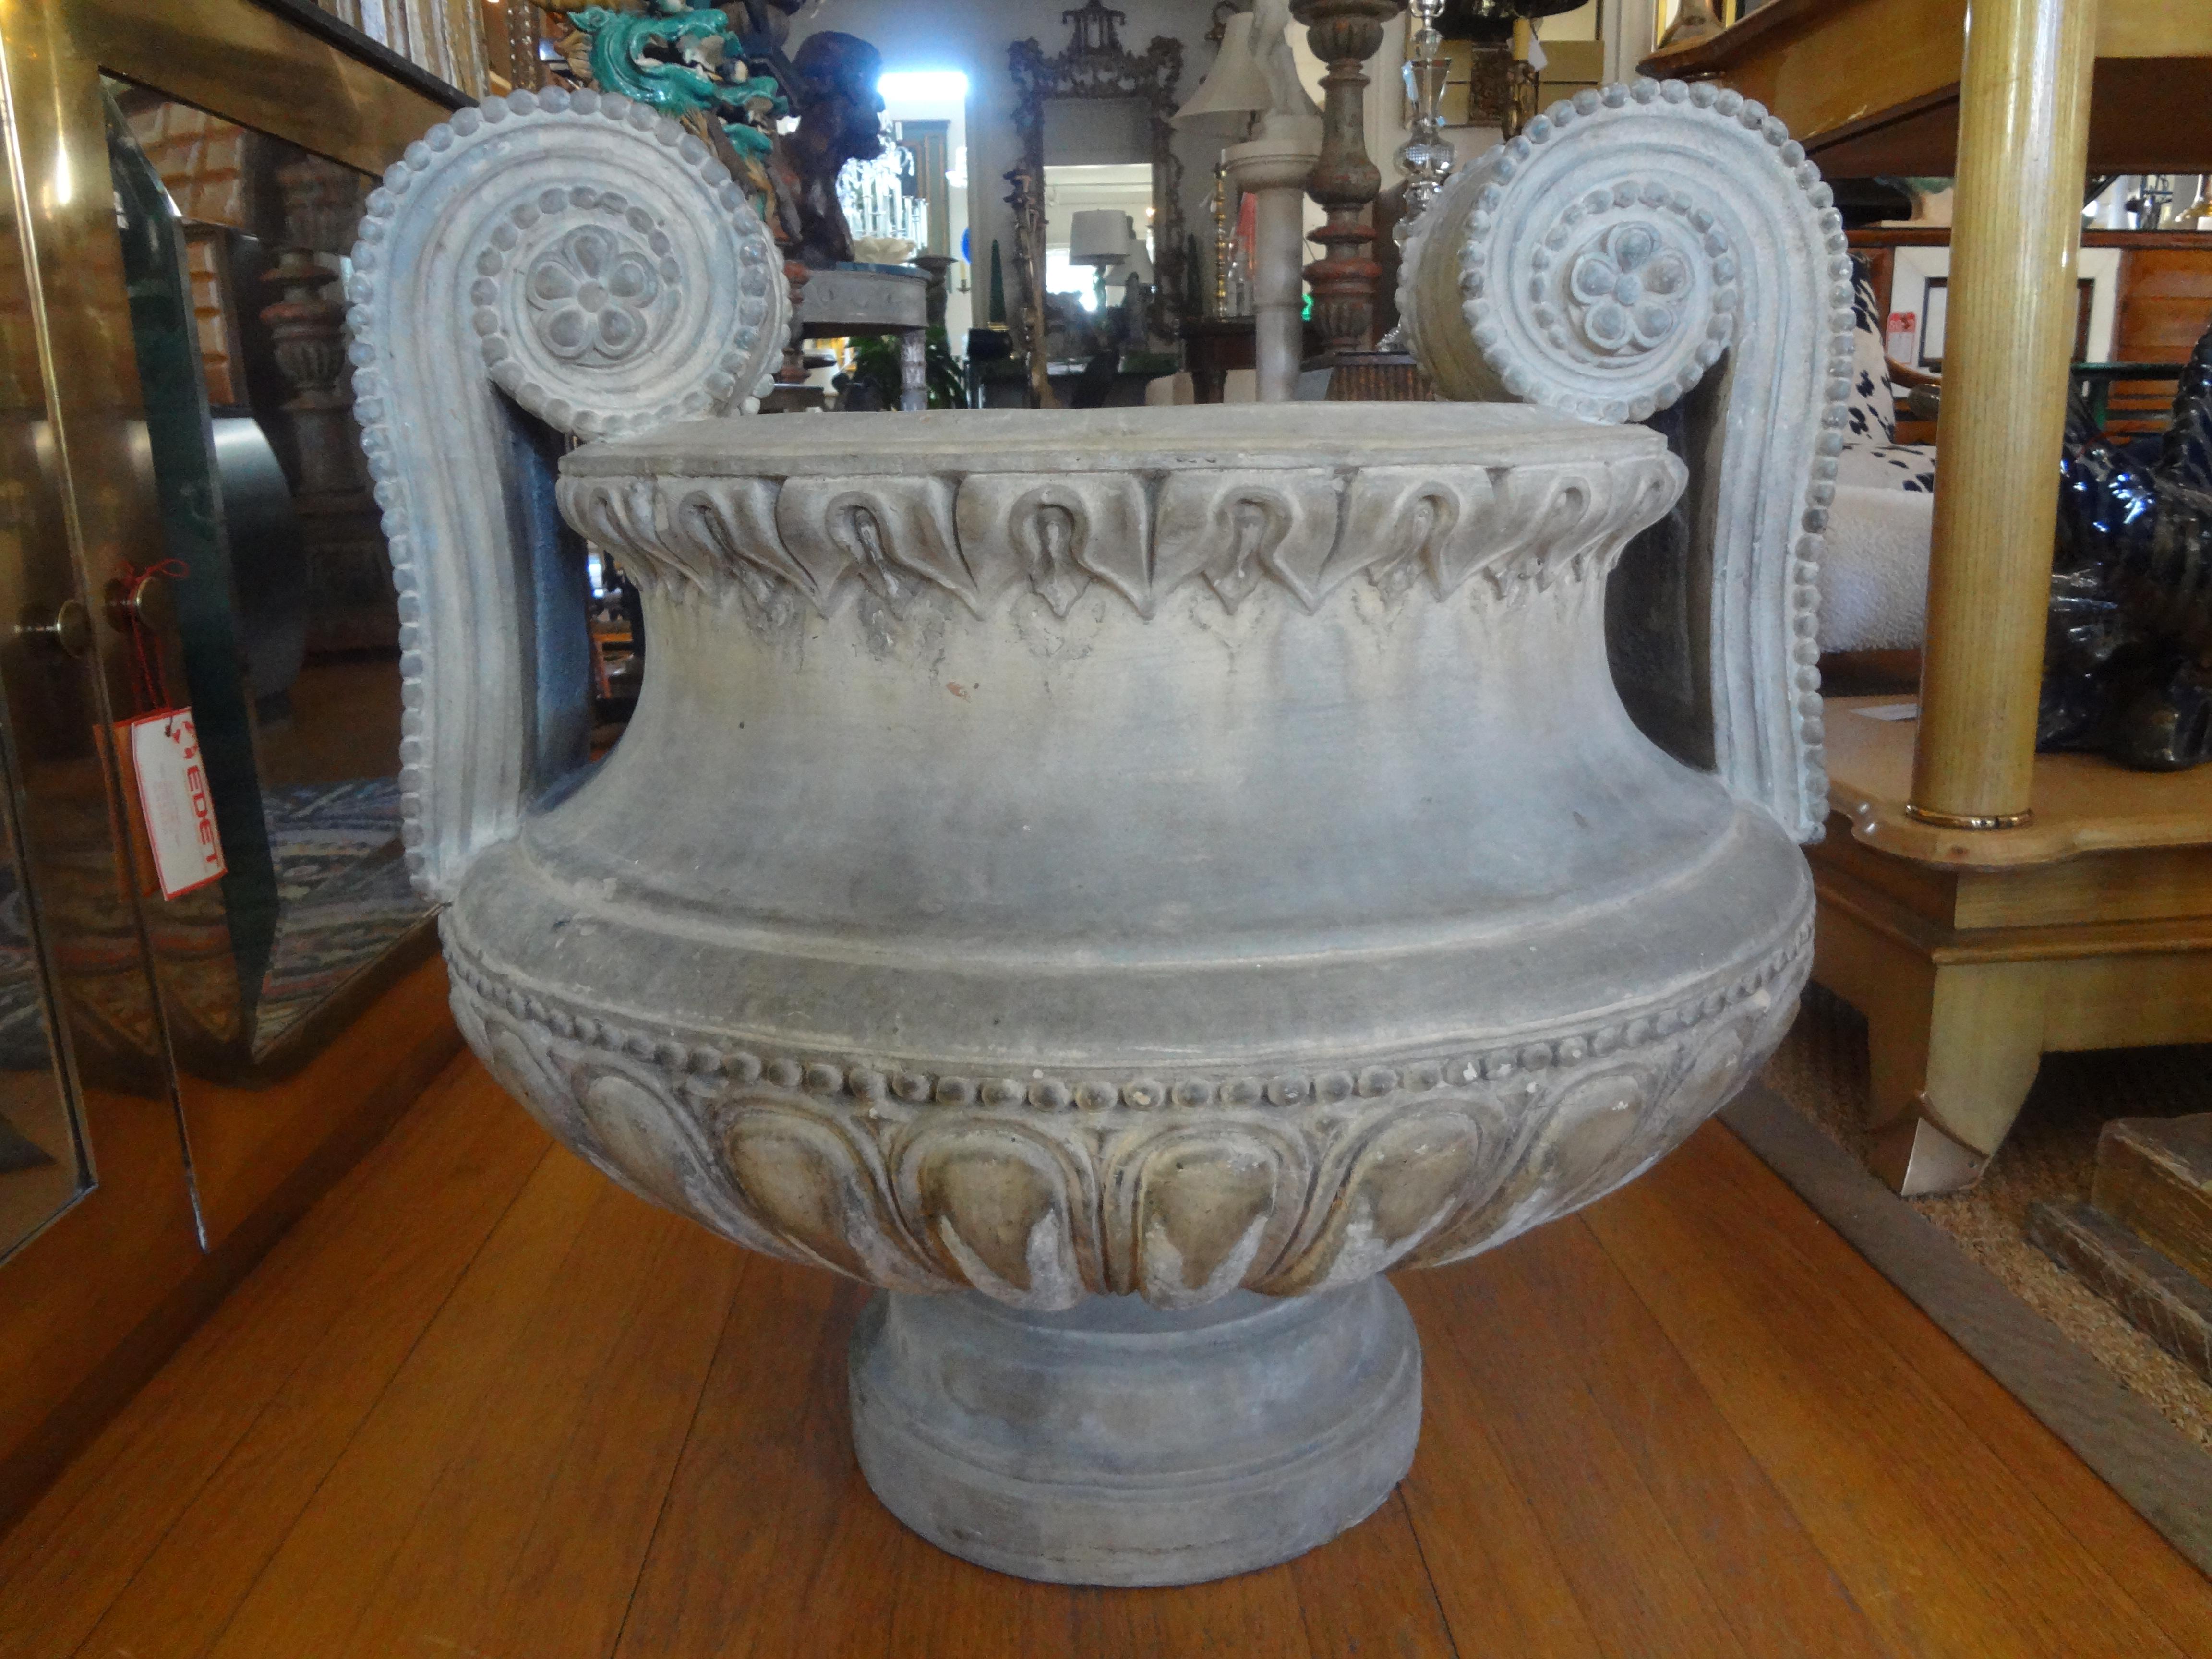 Monumental 18th century French Louis XVI terracotta urn.
This stunning 18th century French Louis XVI terra cotta garden urn, garden ornament, jardiniere or planter has a Grecian feel and would look equally as well indoors or outdoors. Stunning from